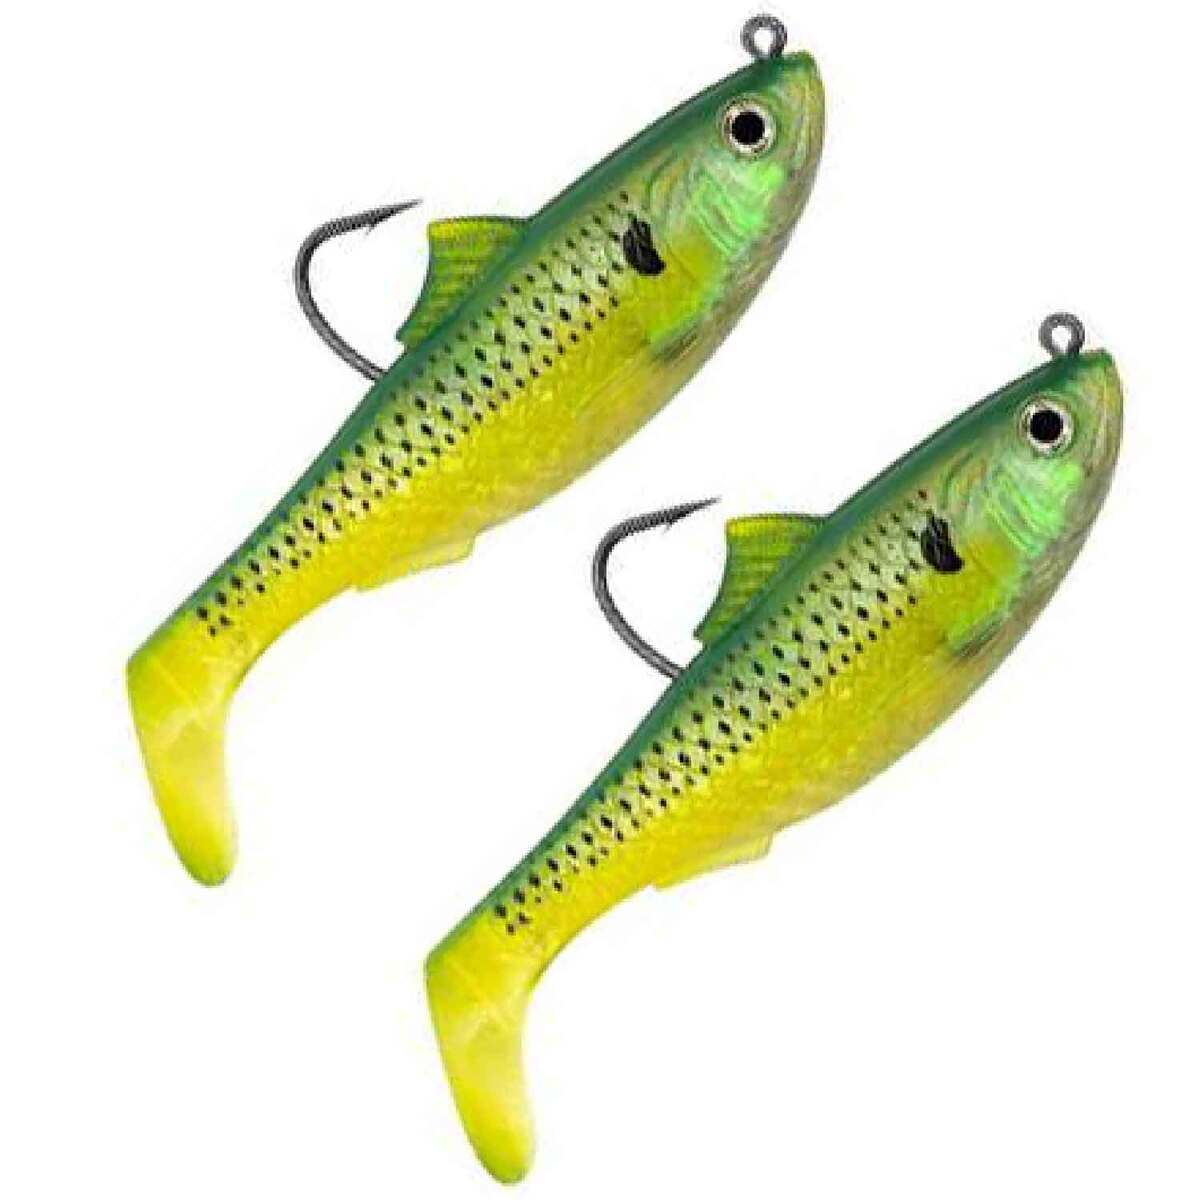 Sassy Shad 6 inch Soft Plastic Bait Swim Bait Paddle Tail. Made in the  U.S.A. 